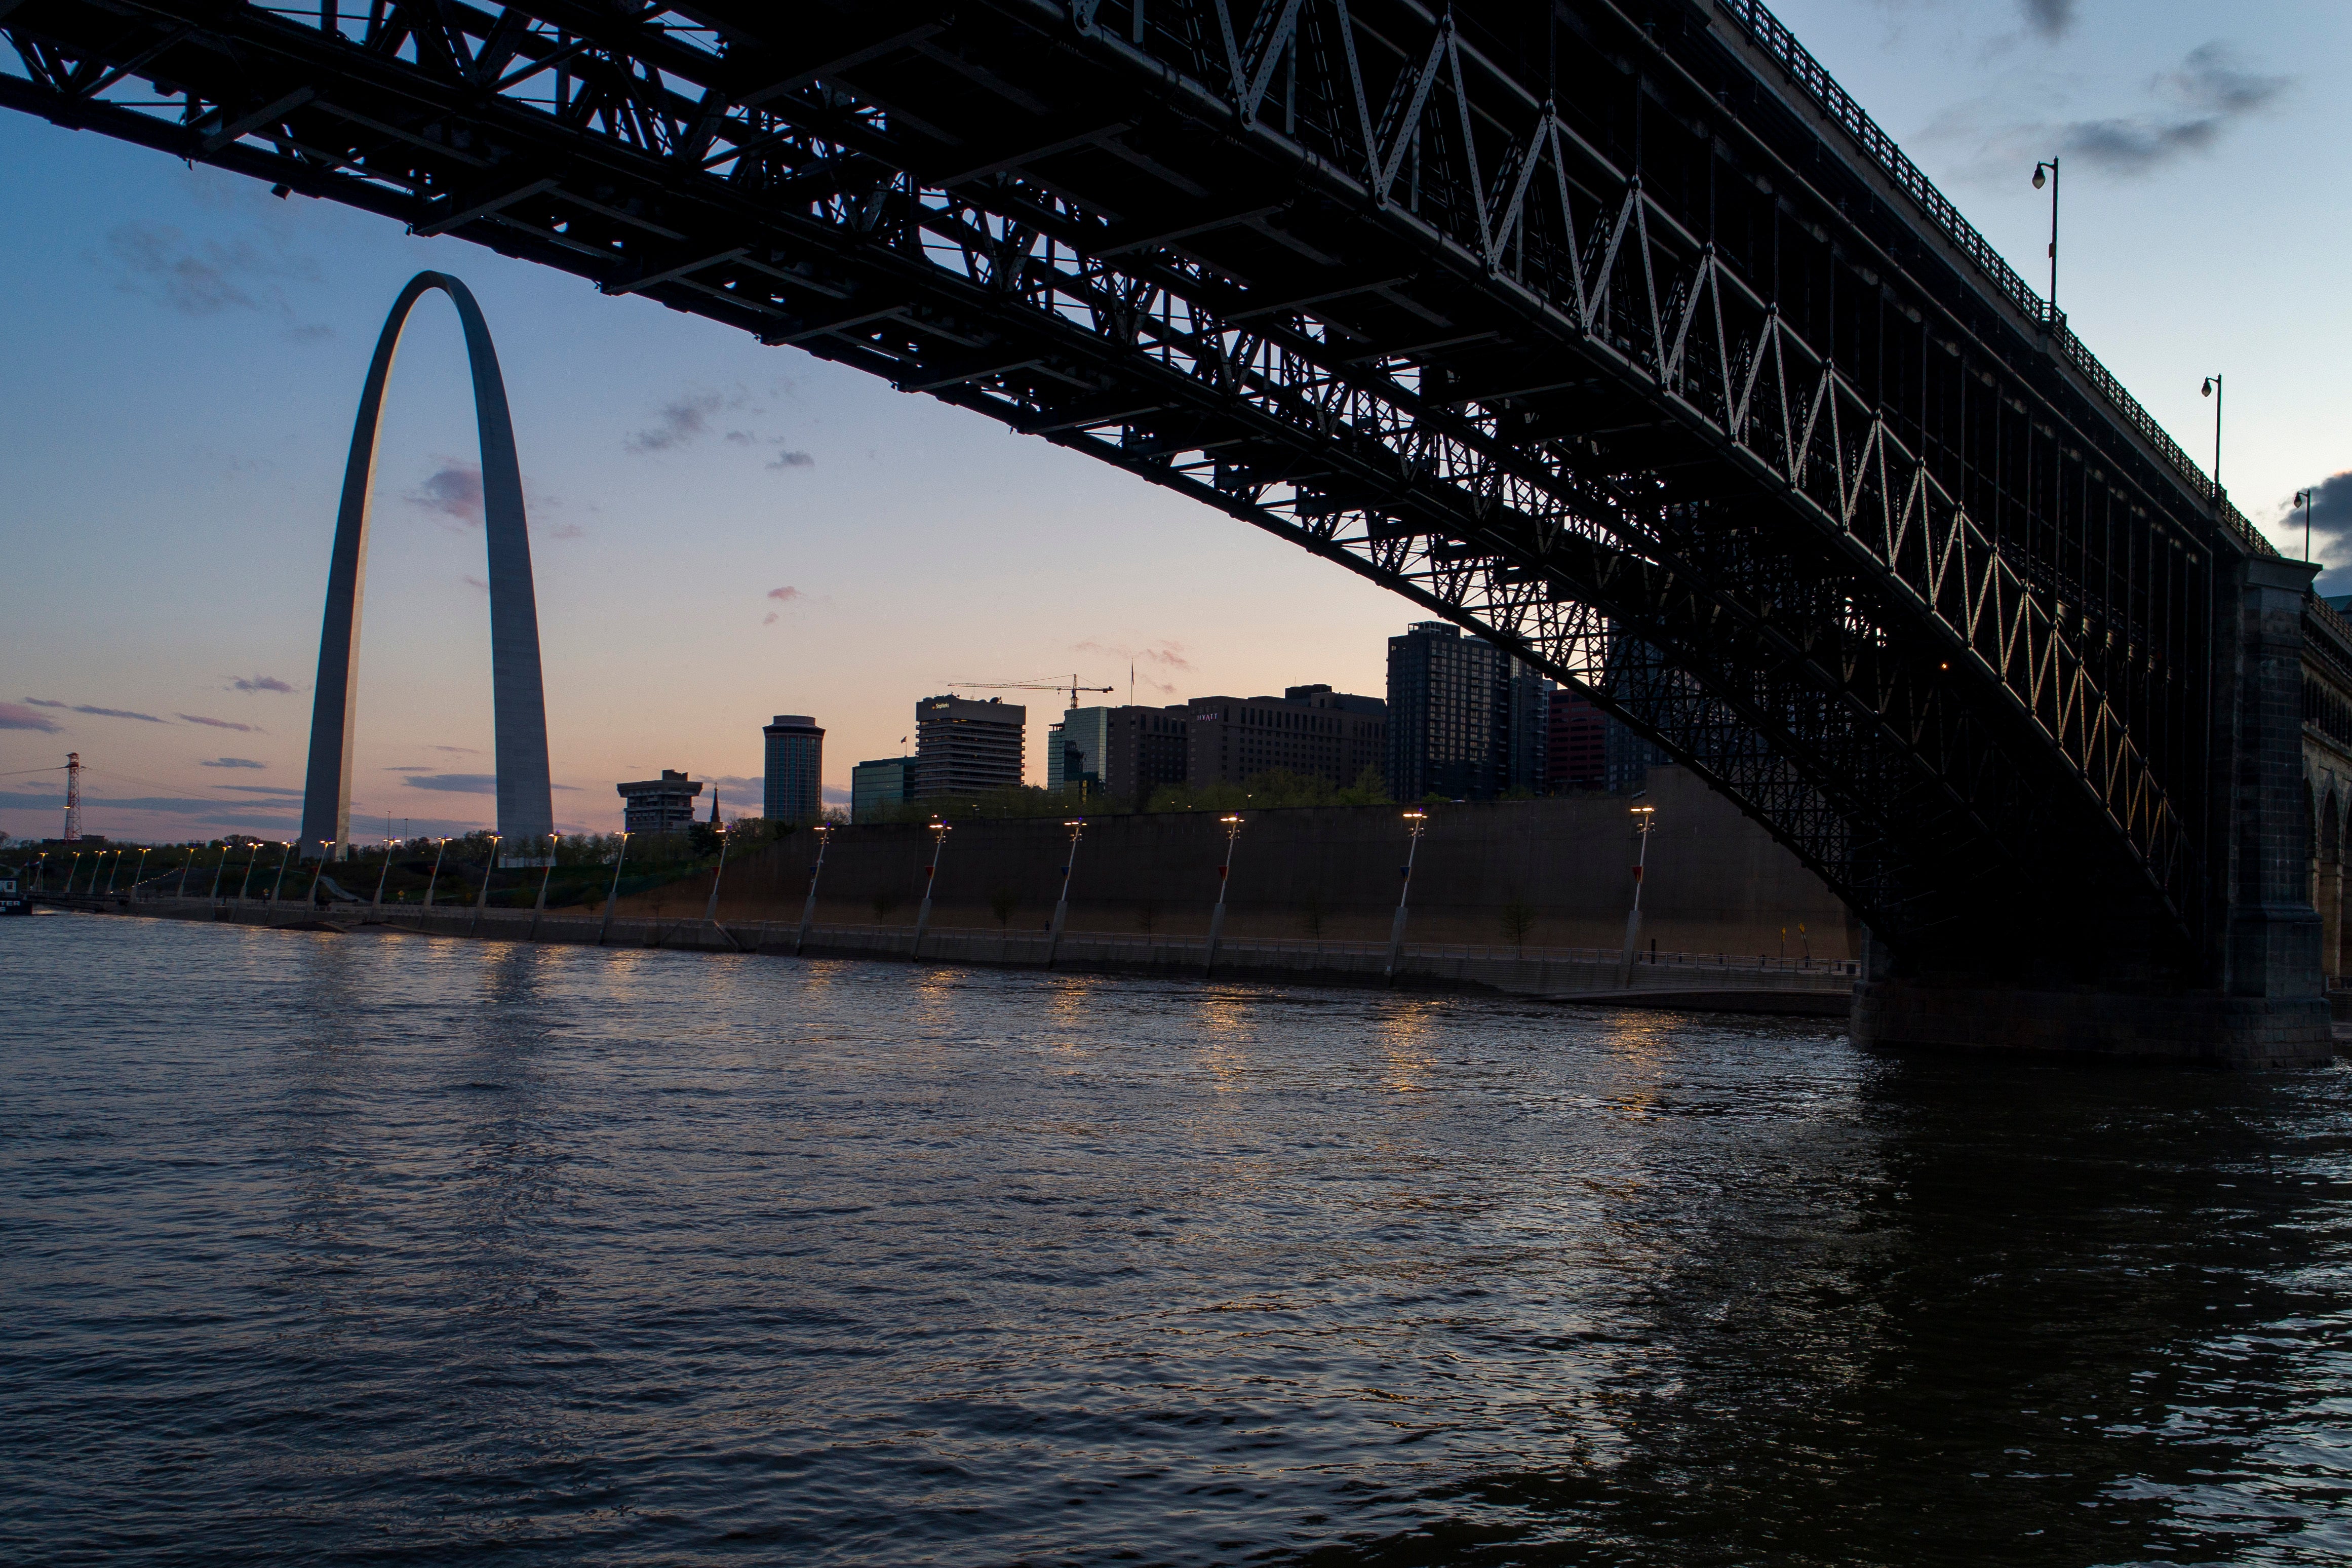 The Eads Bridge crosses the Mississippi River from Illinois to Missouri